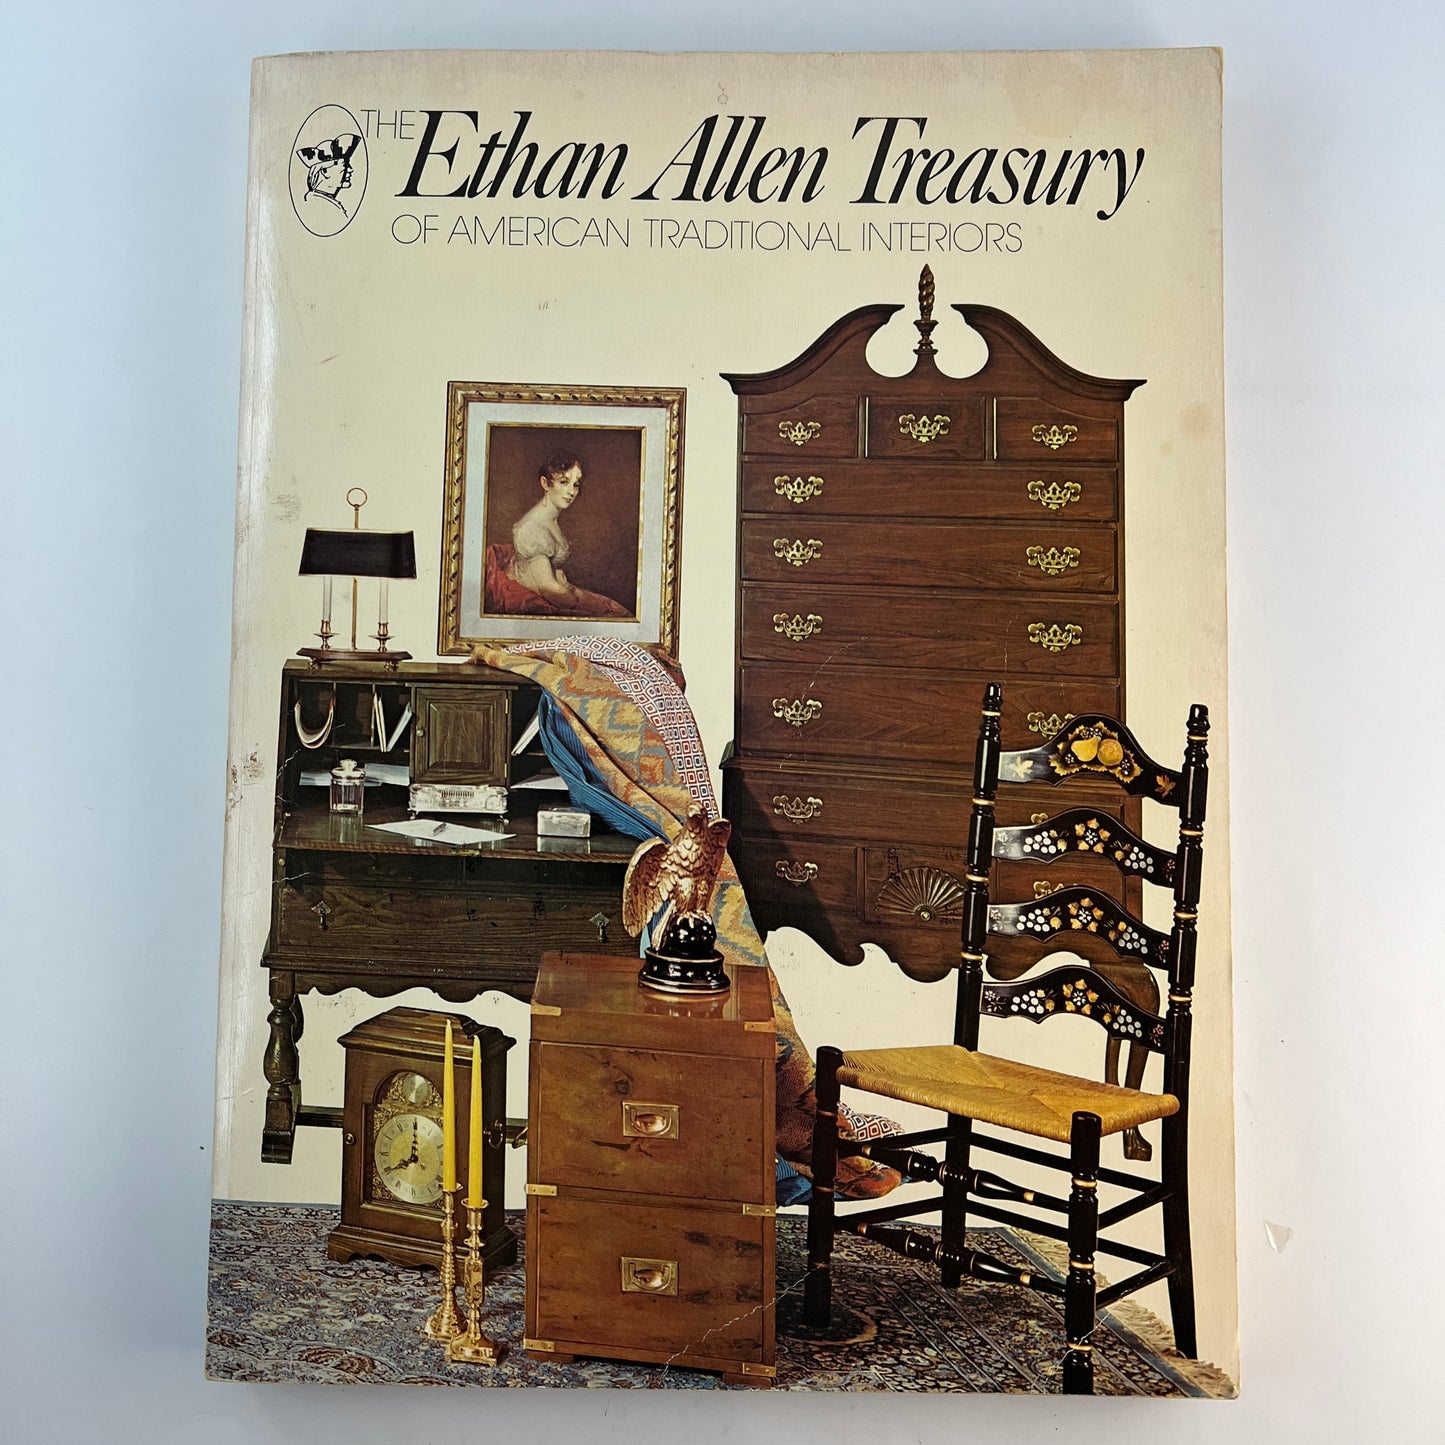 The Ethan Allen Treasury of American Traditional Interiors